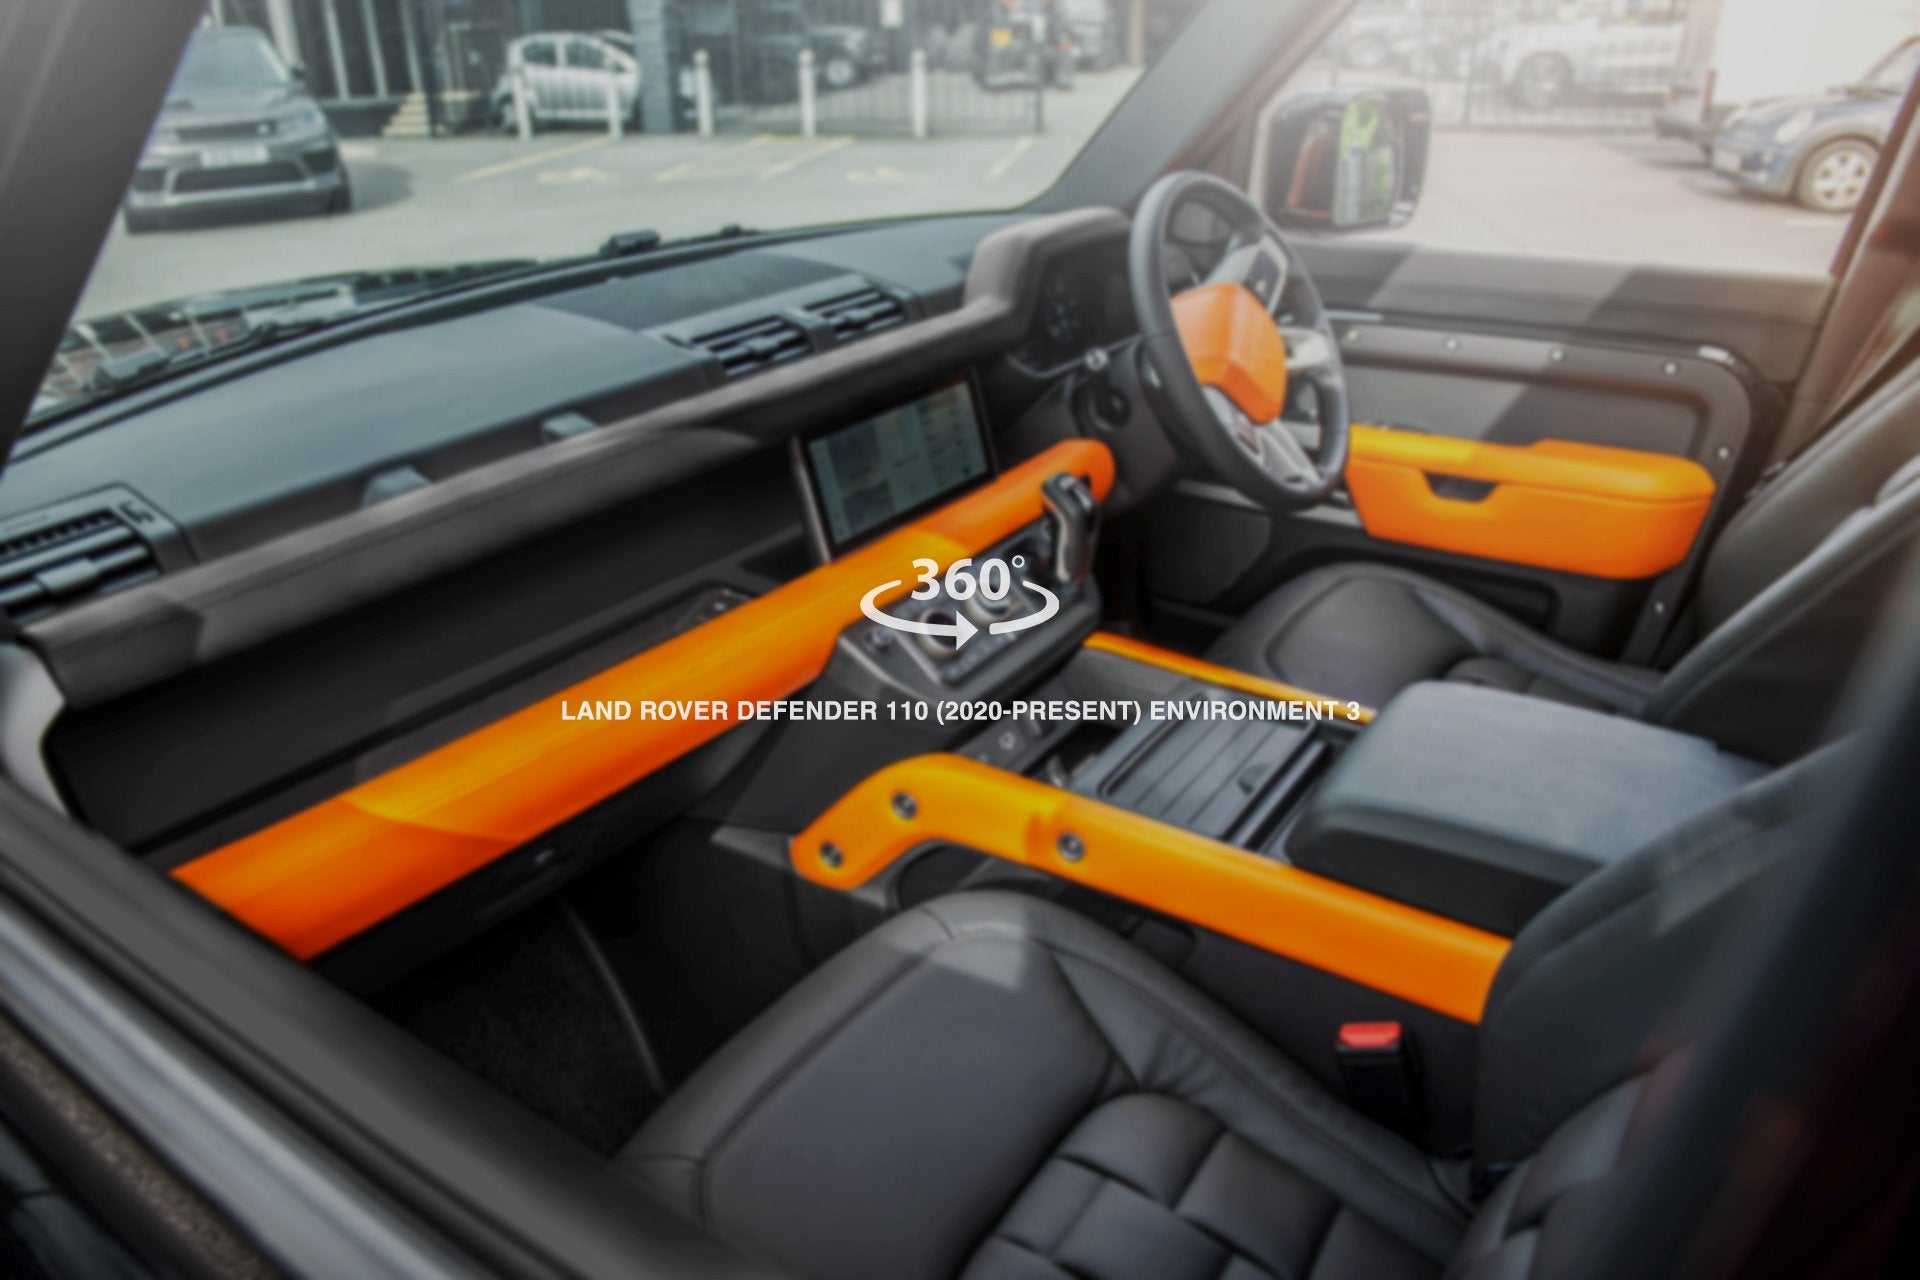 Land Rover Defender 110 (2020-Present) Environment 3: Middle and Lower Interior 360° Tour